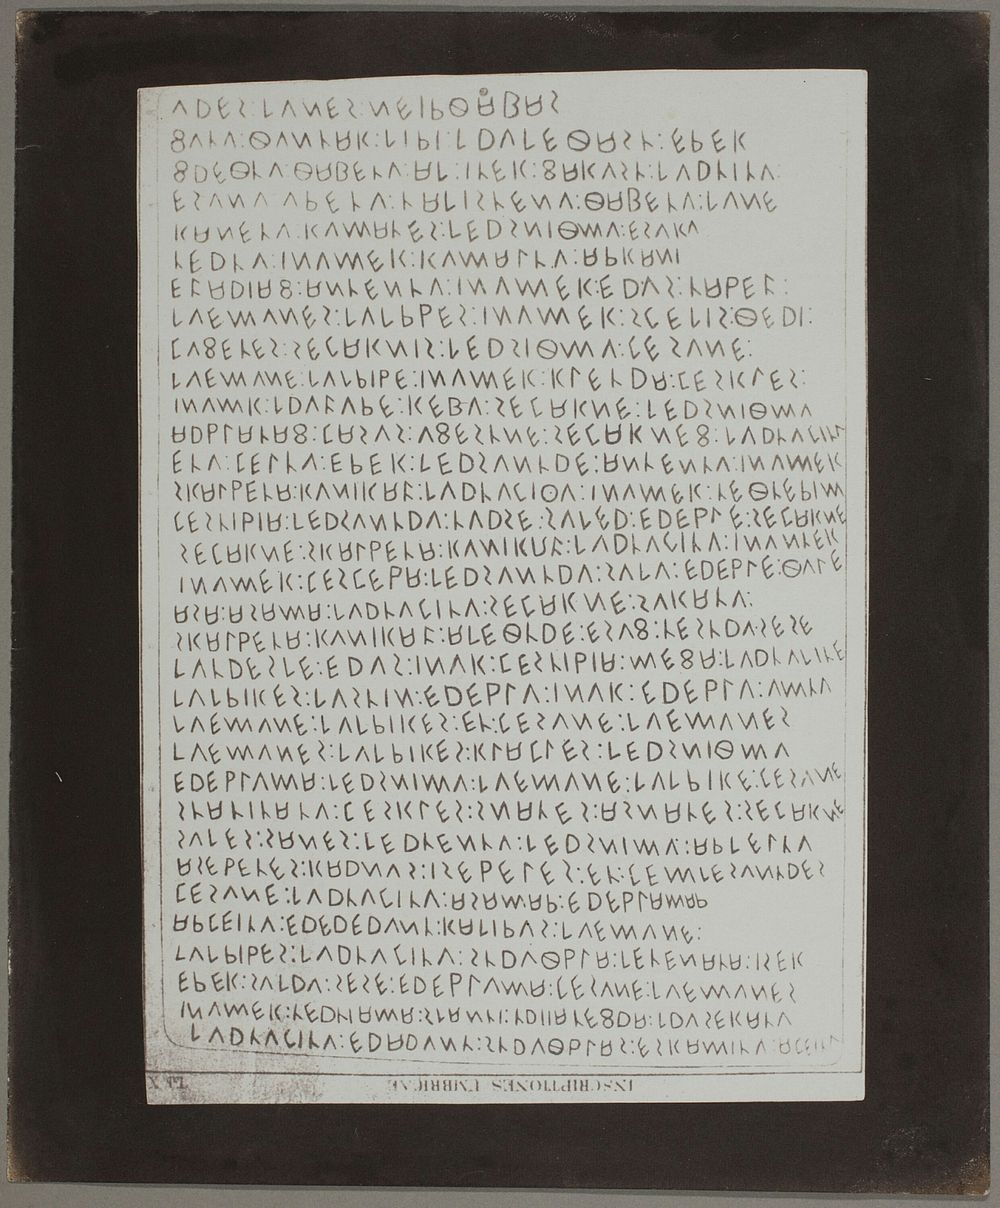 Copy Print From "Celebrated Inscriptions Ancient Eugubine Tablets" by William Henry Fox Talbot